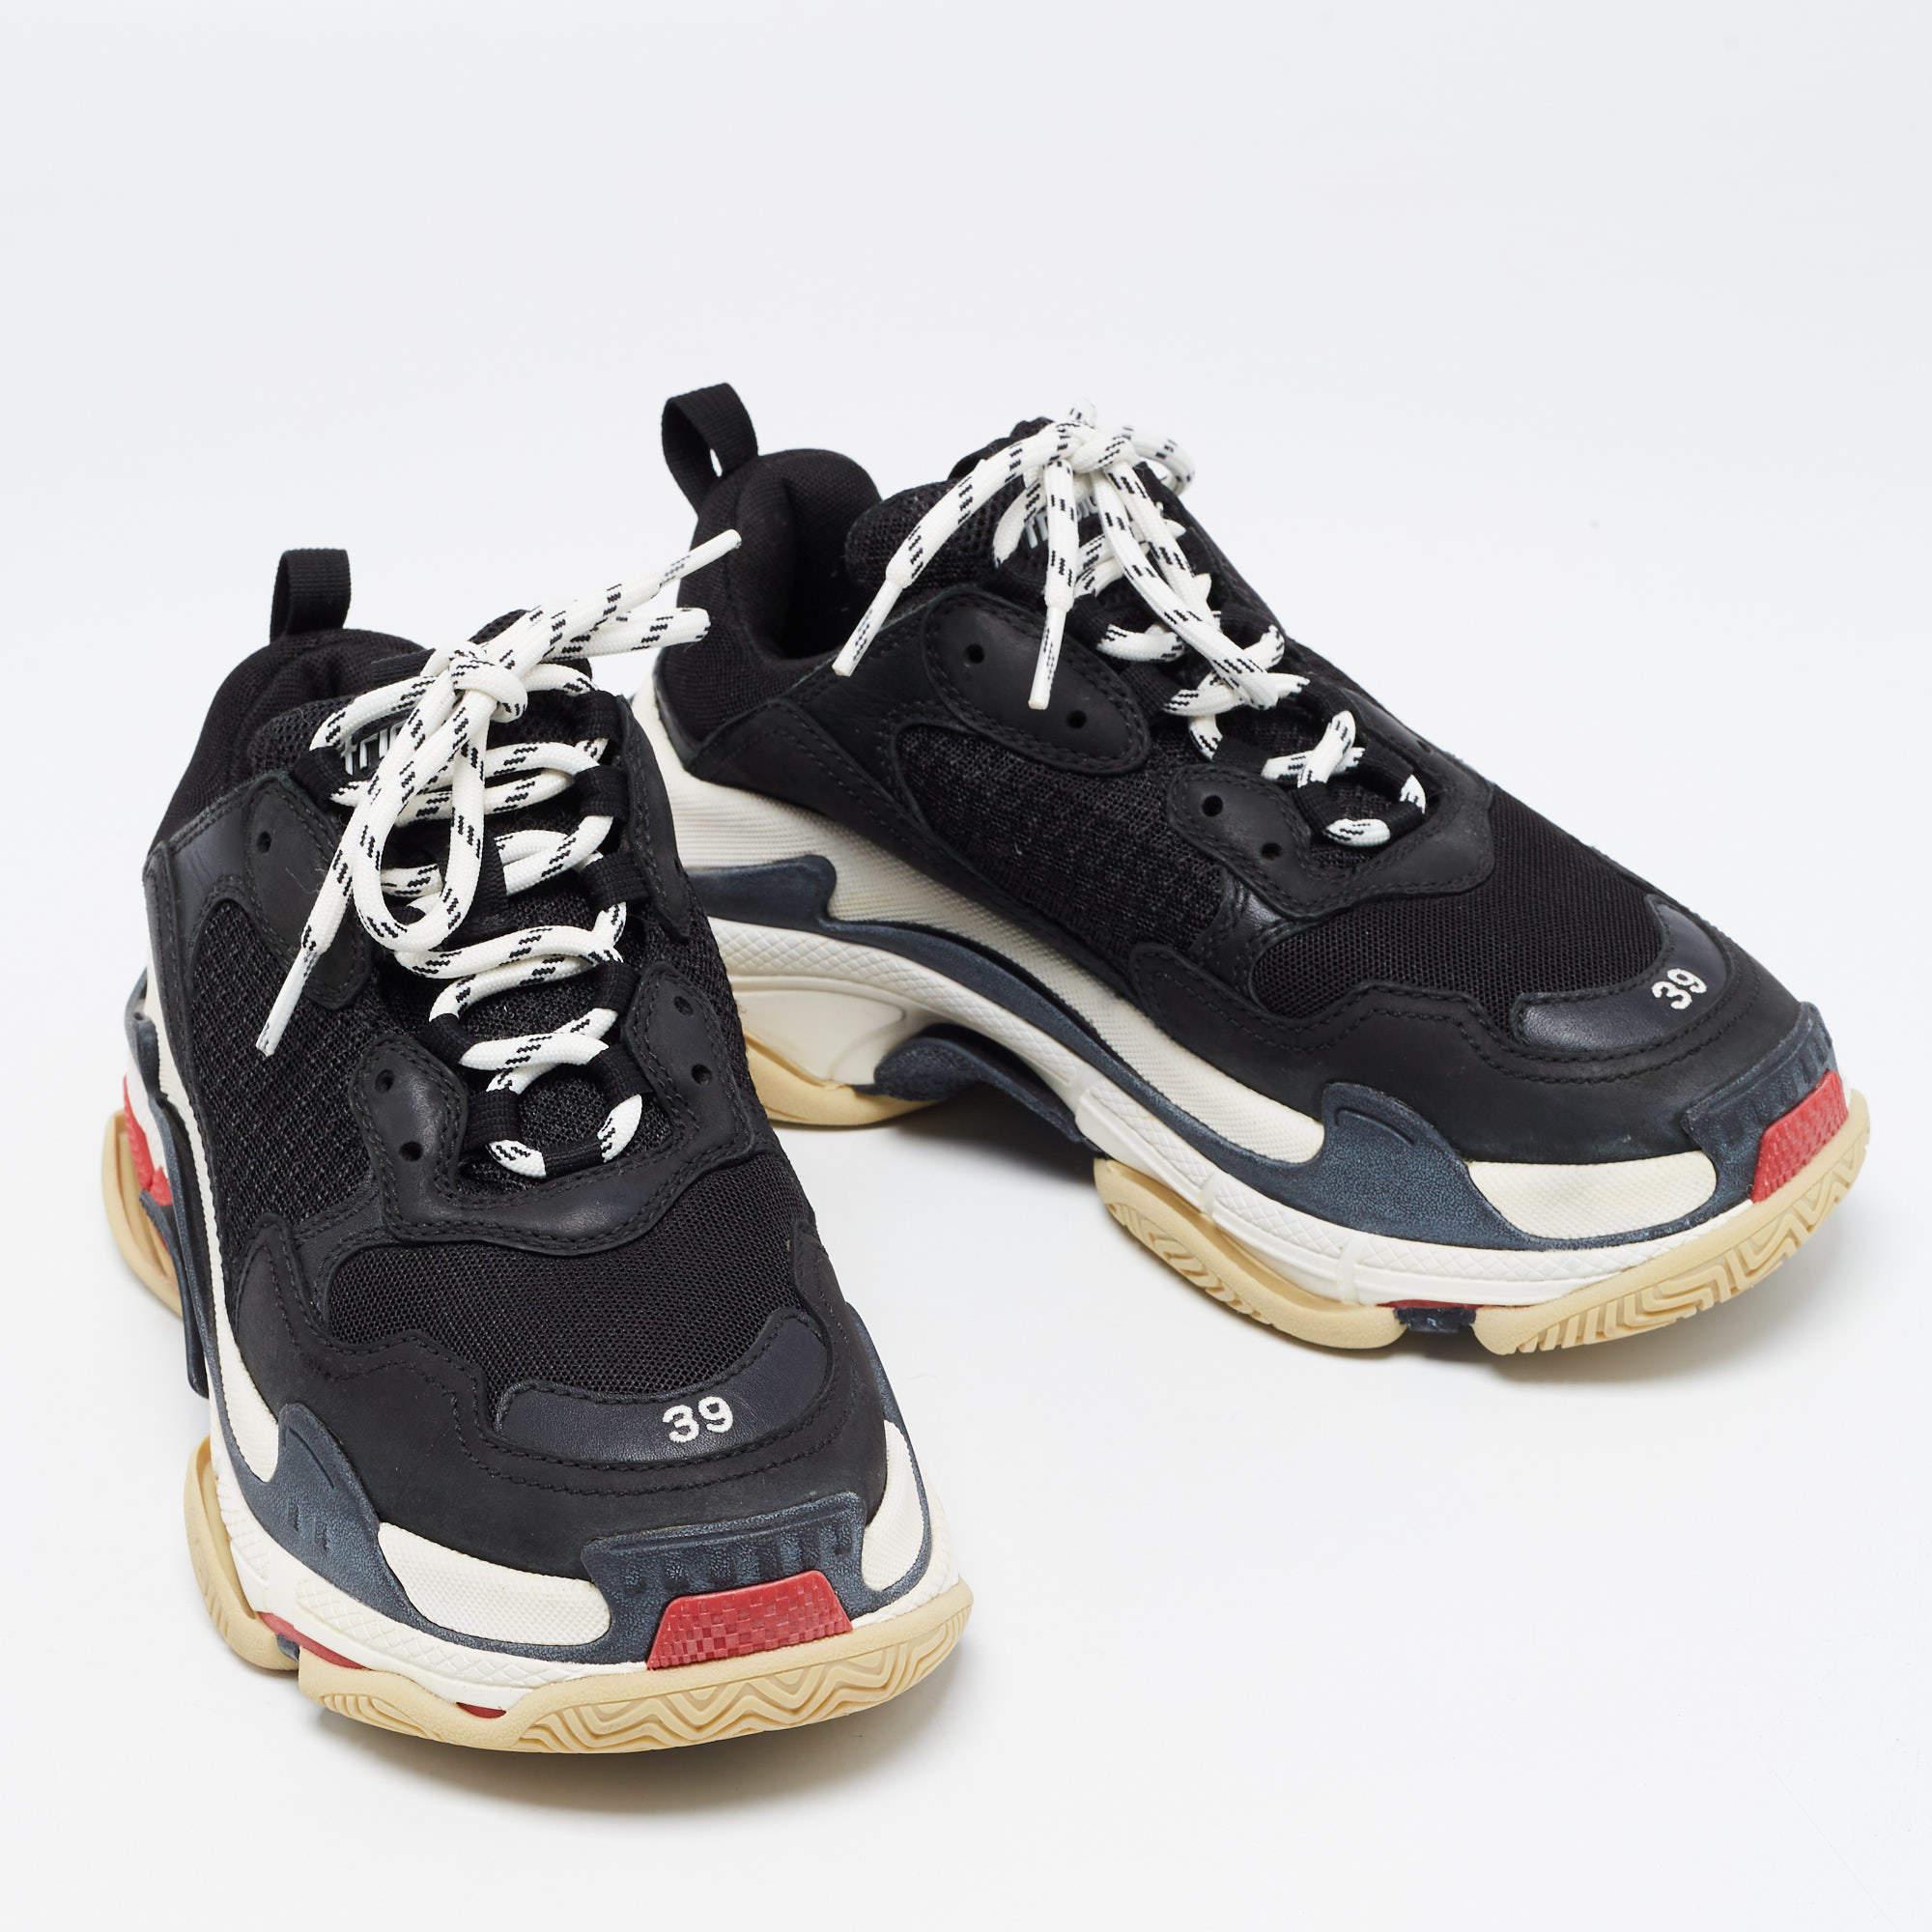 Balenciaga Black Mesh and Leather Triple S Sneakers Size 39 1